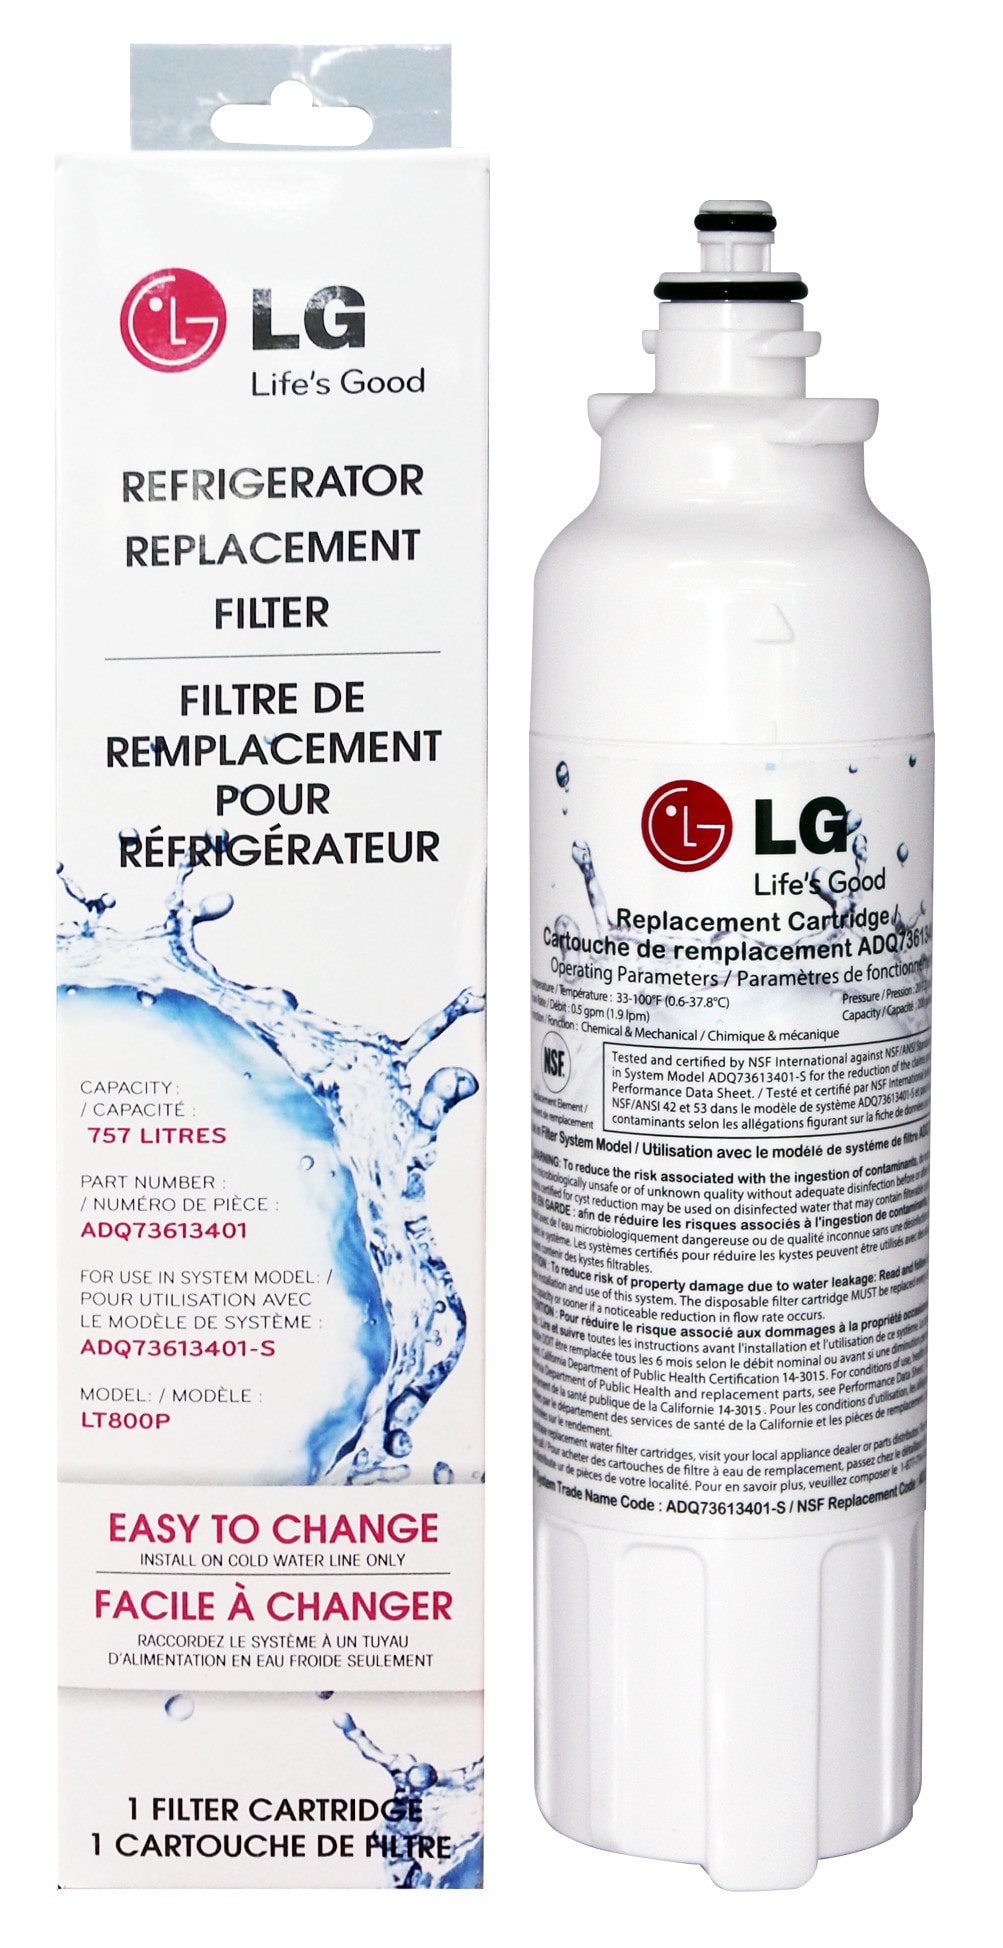 Model LT800P 200 Gal Details about   LG Refrigerator Replacement Filter 